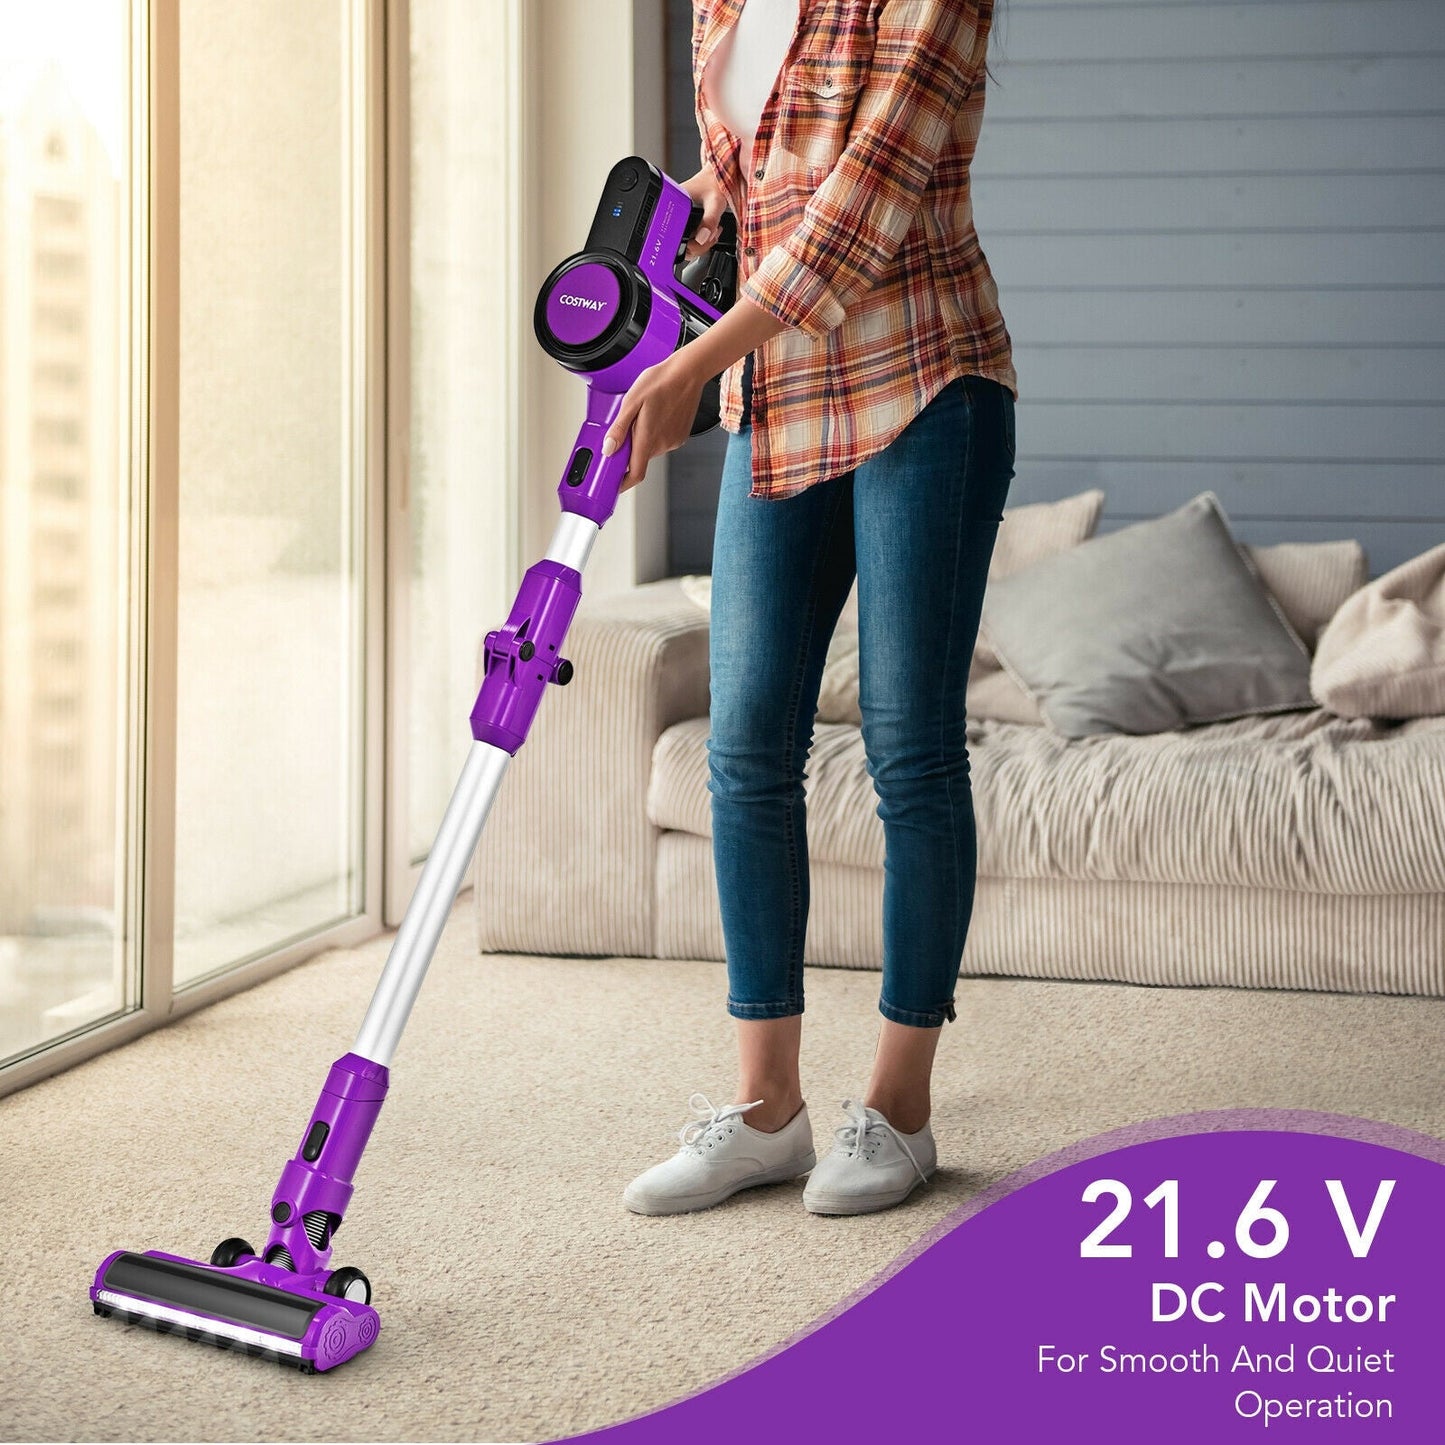 3-in-1 Handheld Cordless Stick Vacuum Cleaner with 6-cell Lithium Battery - Gallery Canada